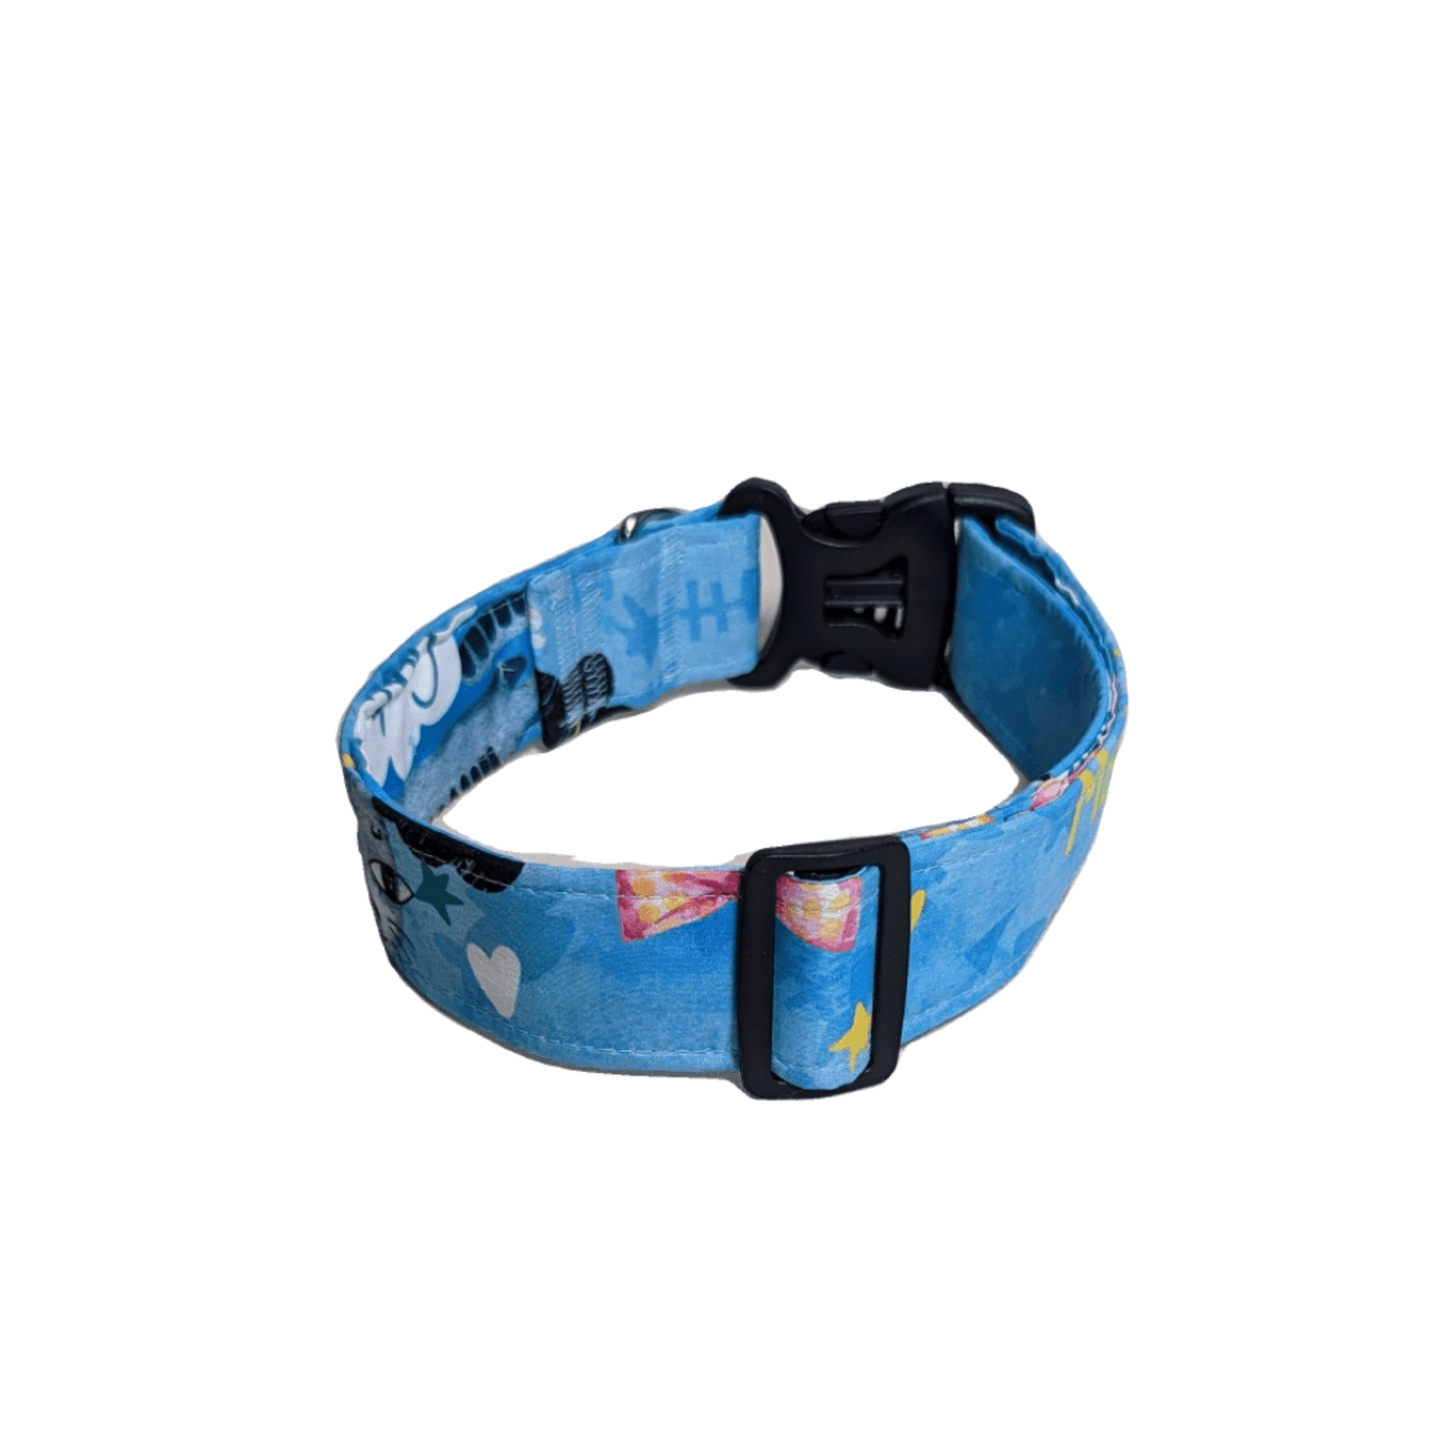 Blue Cat Silhouette Dog Collar - Keep your dog stylish and secure with this eye-catching collar featuring a charming cat silhouette in blue.